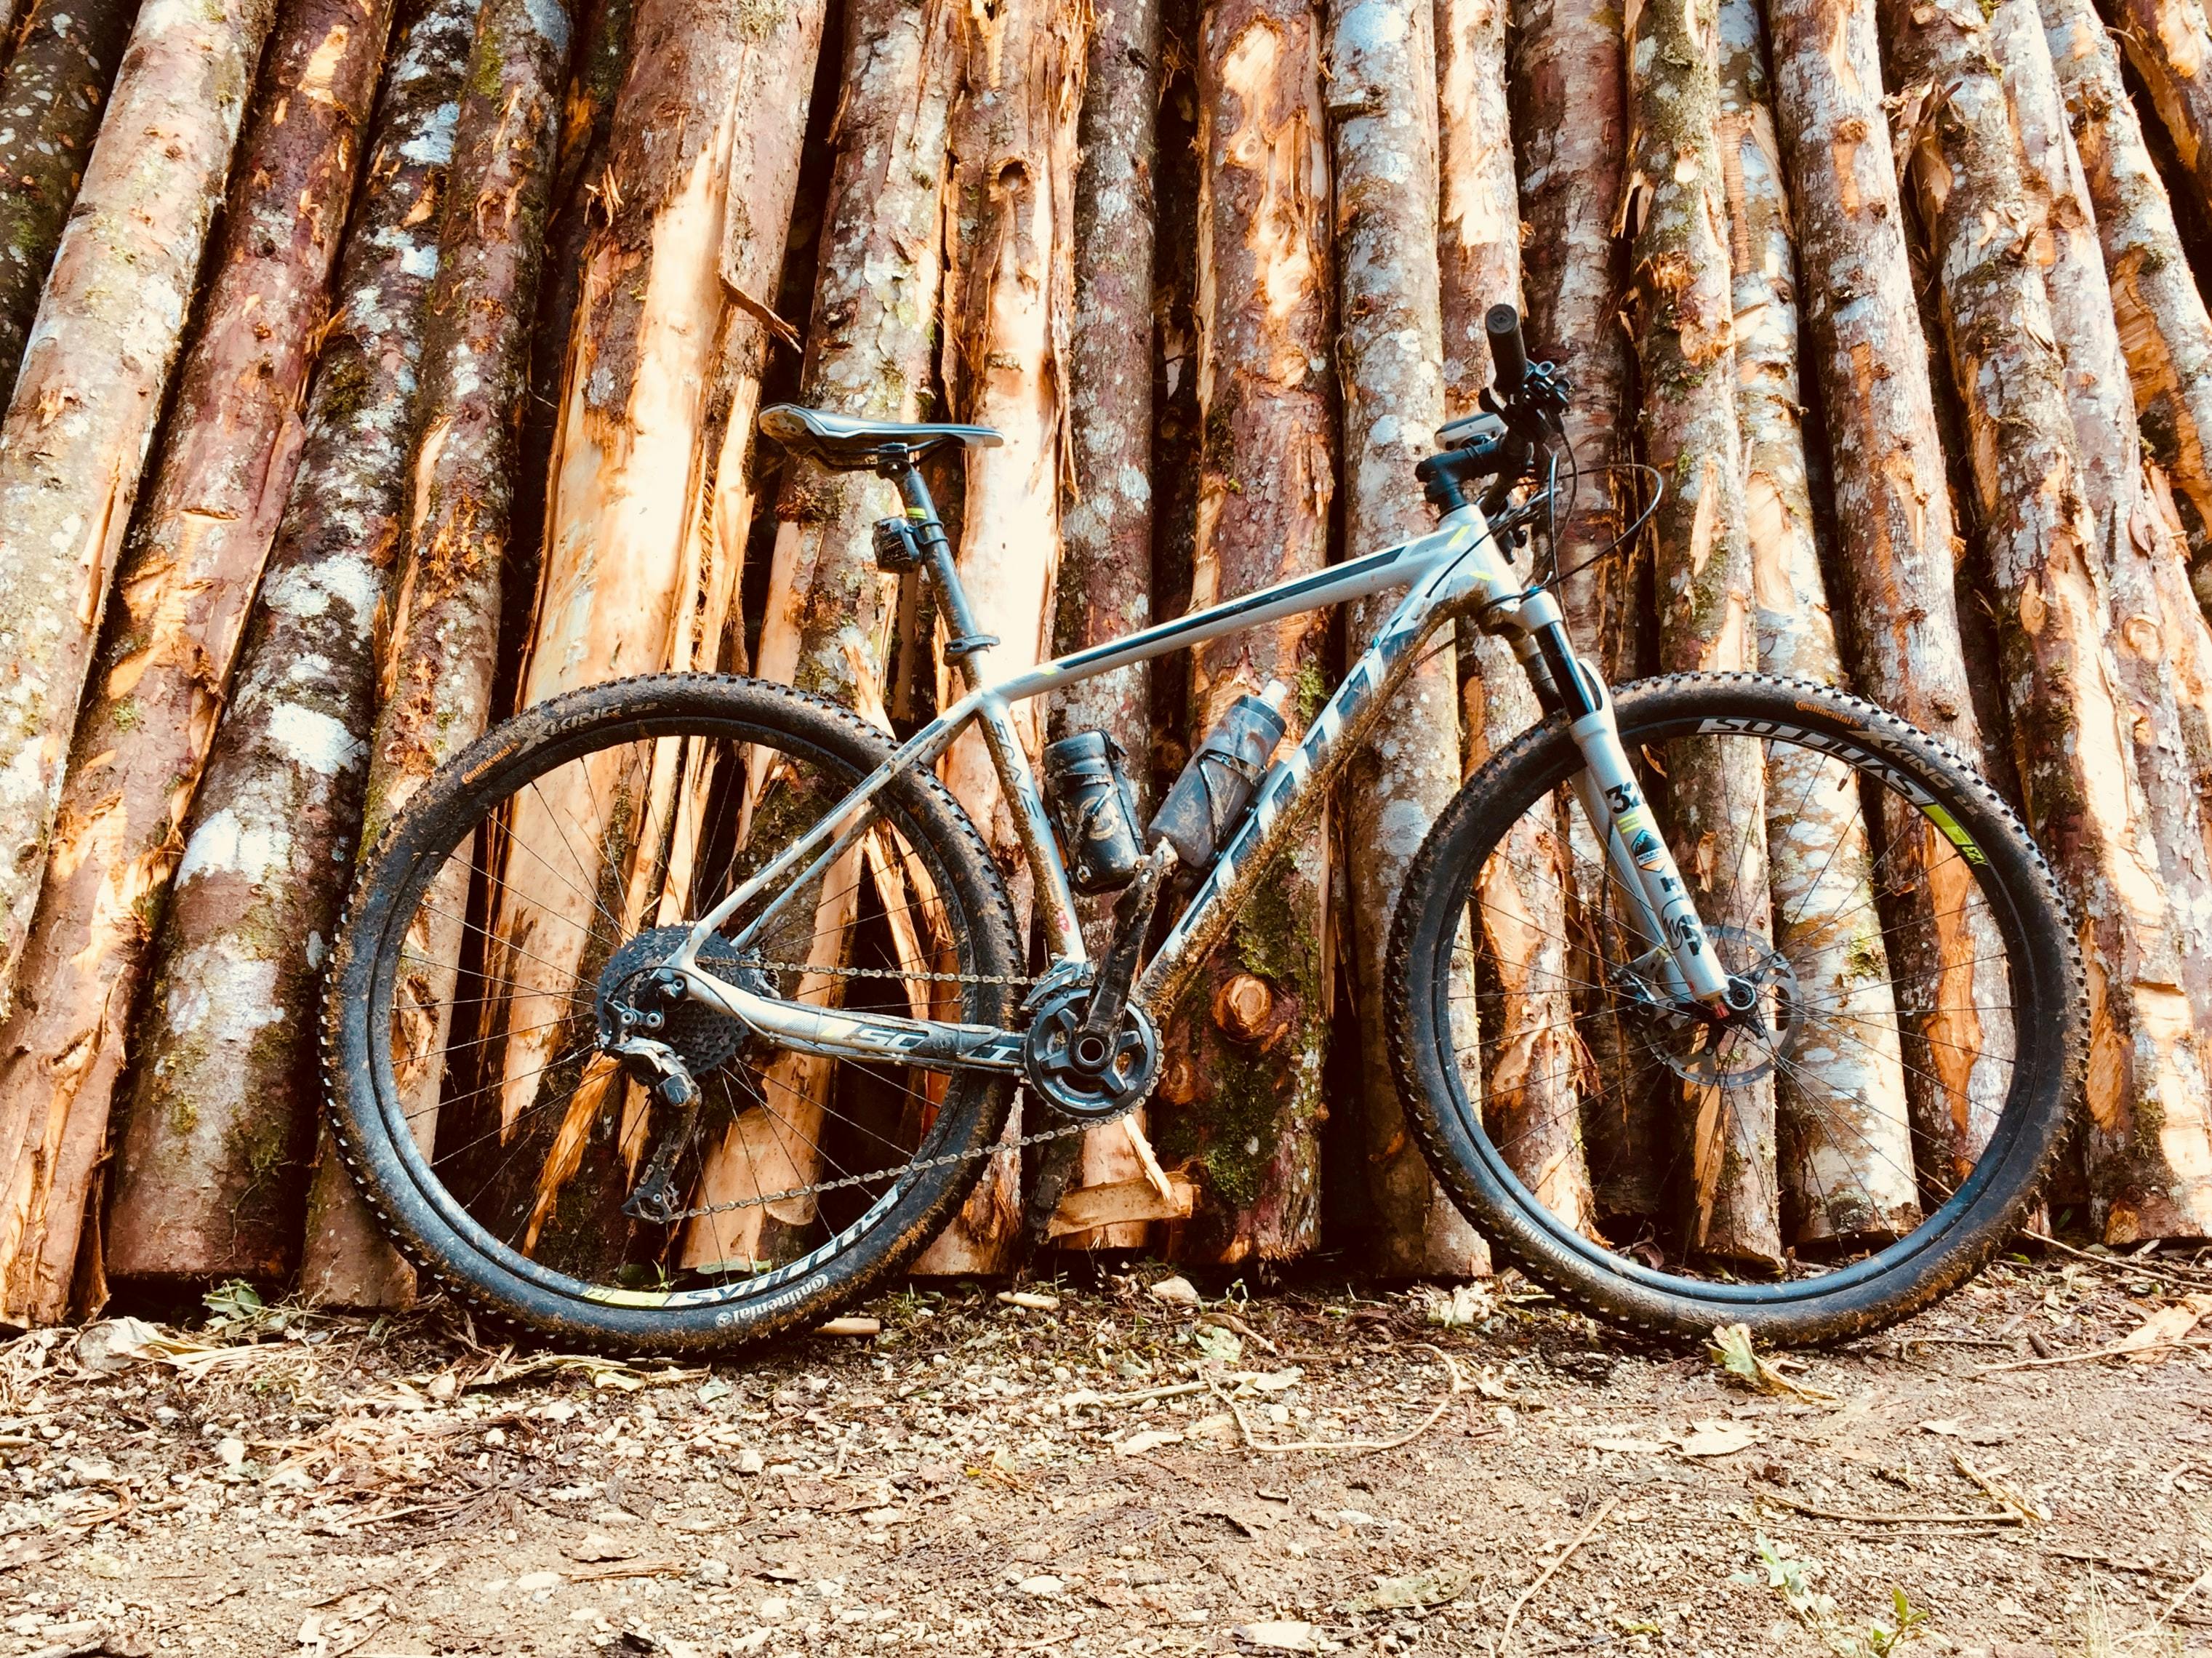 A dirty mountain bike leans against tree trunks